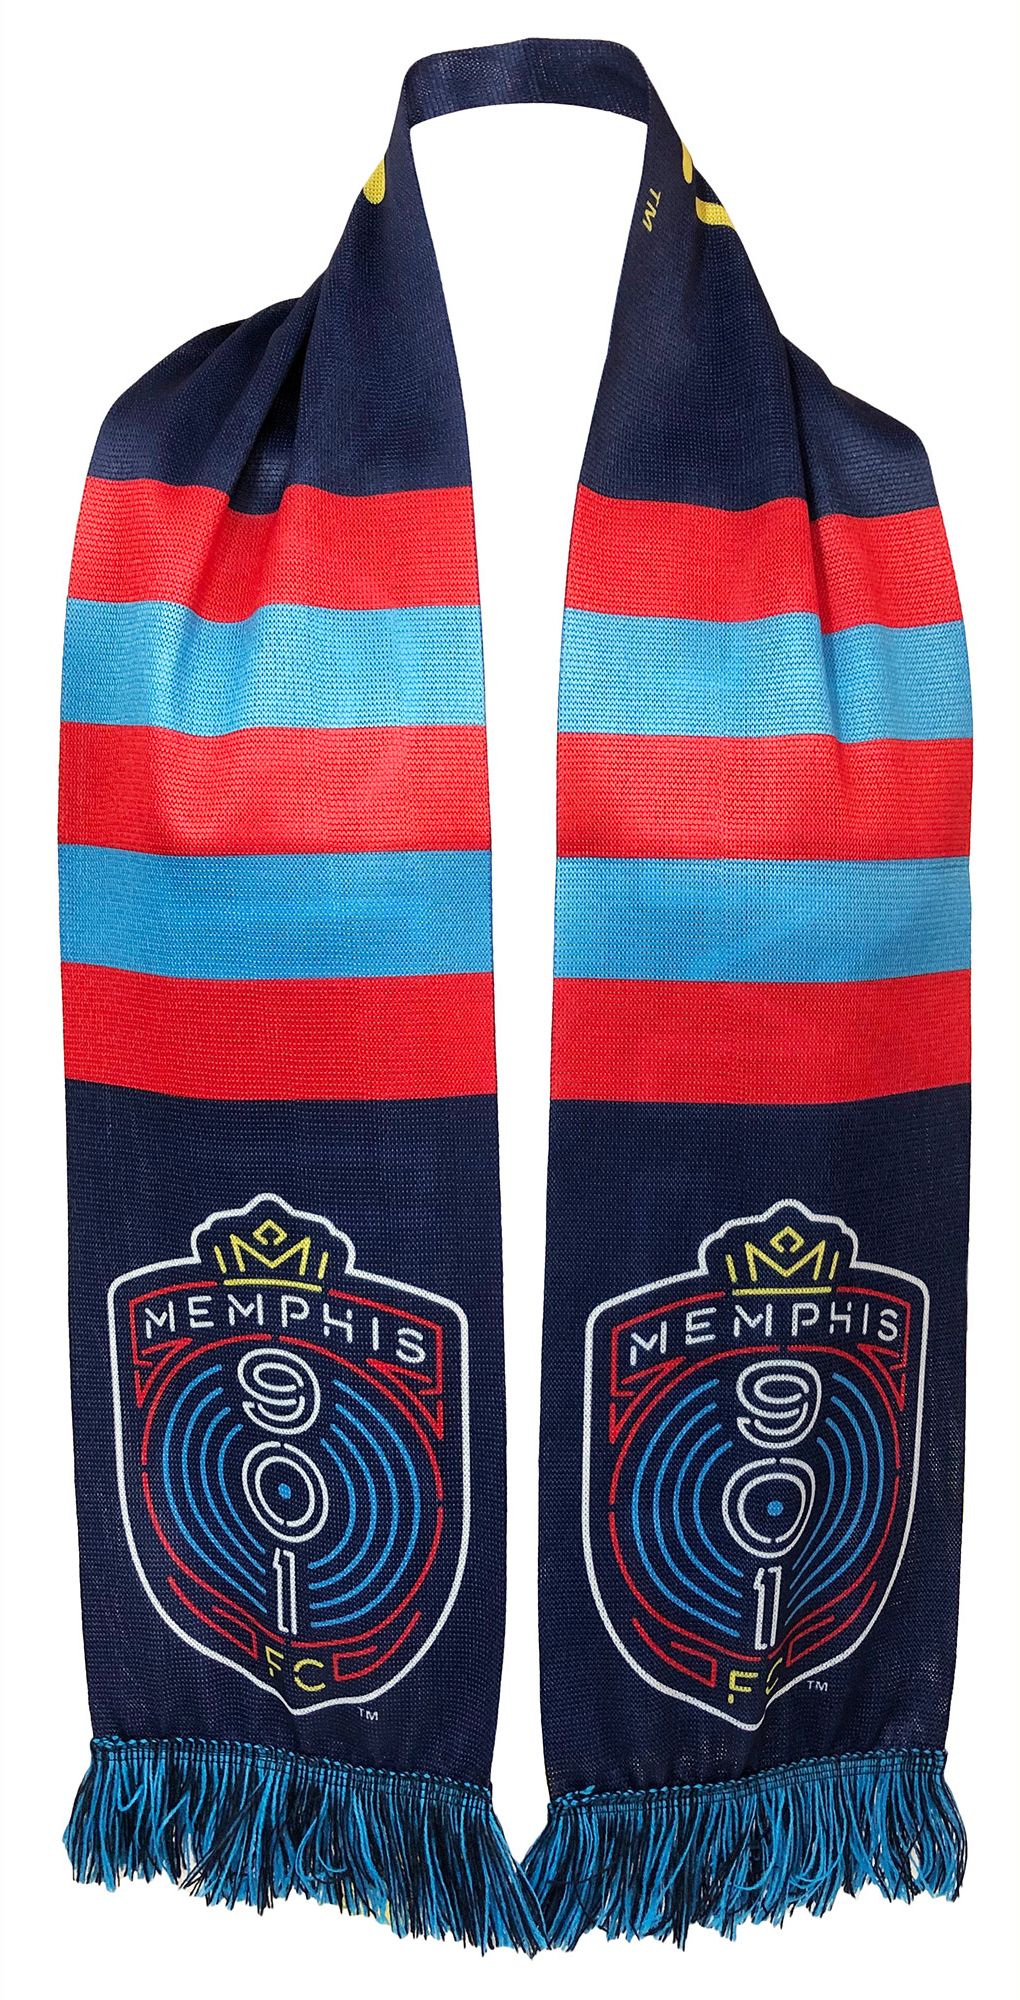 Ruffneck Scarves Memphis 901 FC Neon Sublimated Scarf